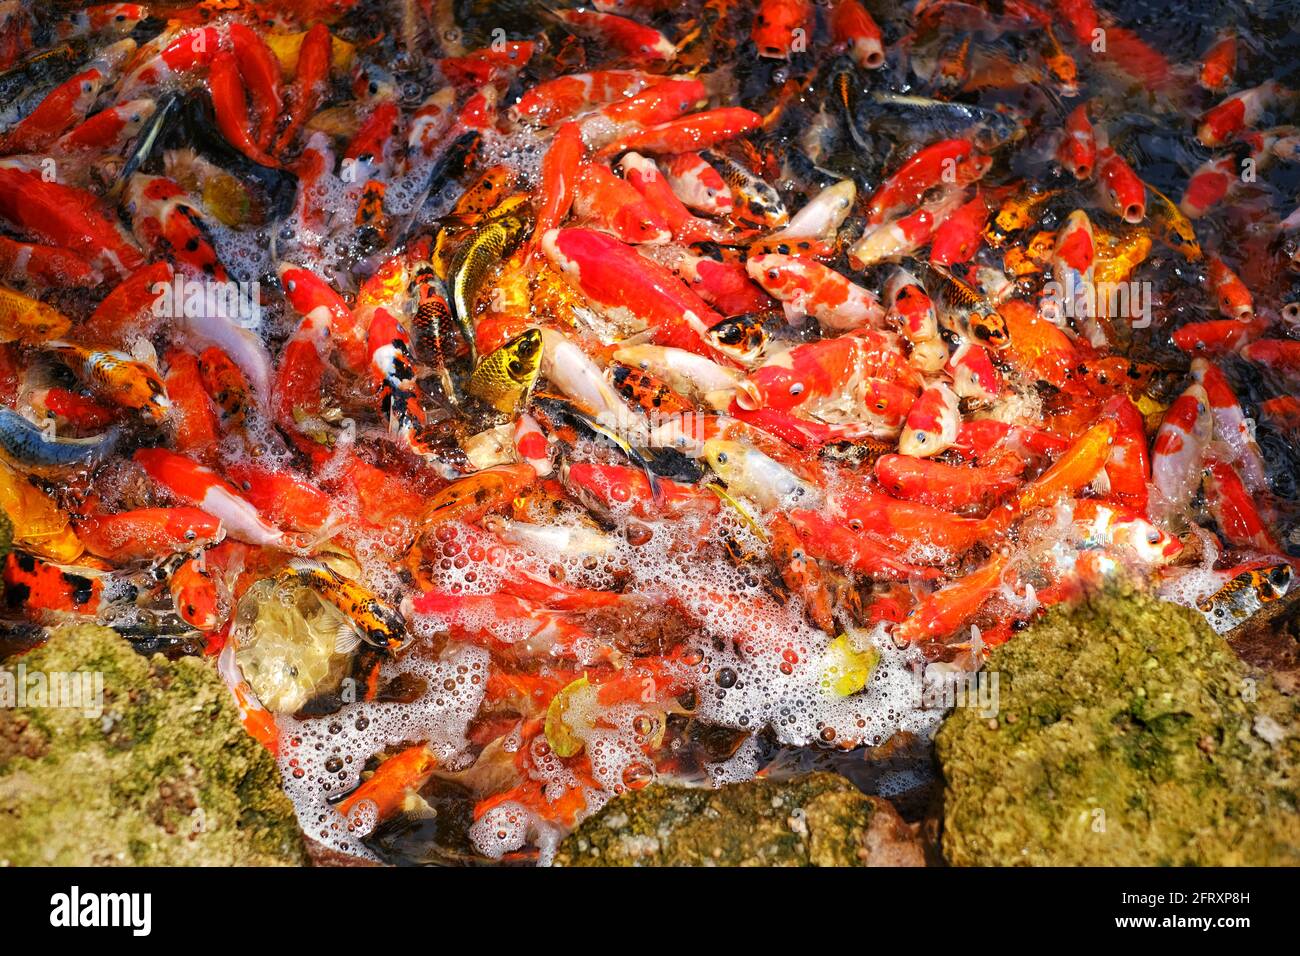 A group of colorful Japanese carp or koi fish on the edge of  pond, swimming tightly together, fighting for food pellets in a frenzy, splashing water. Stock Photo